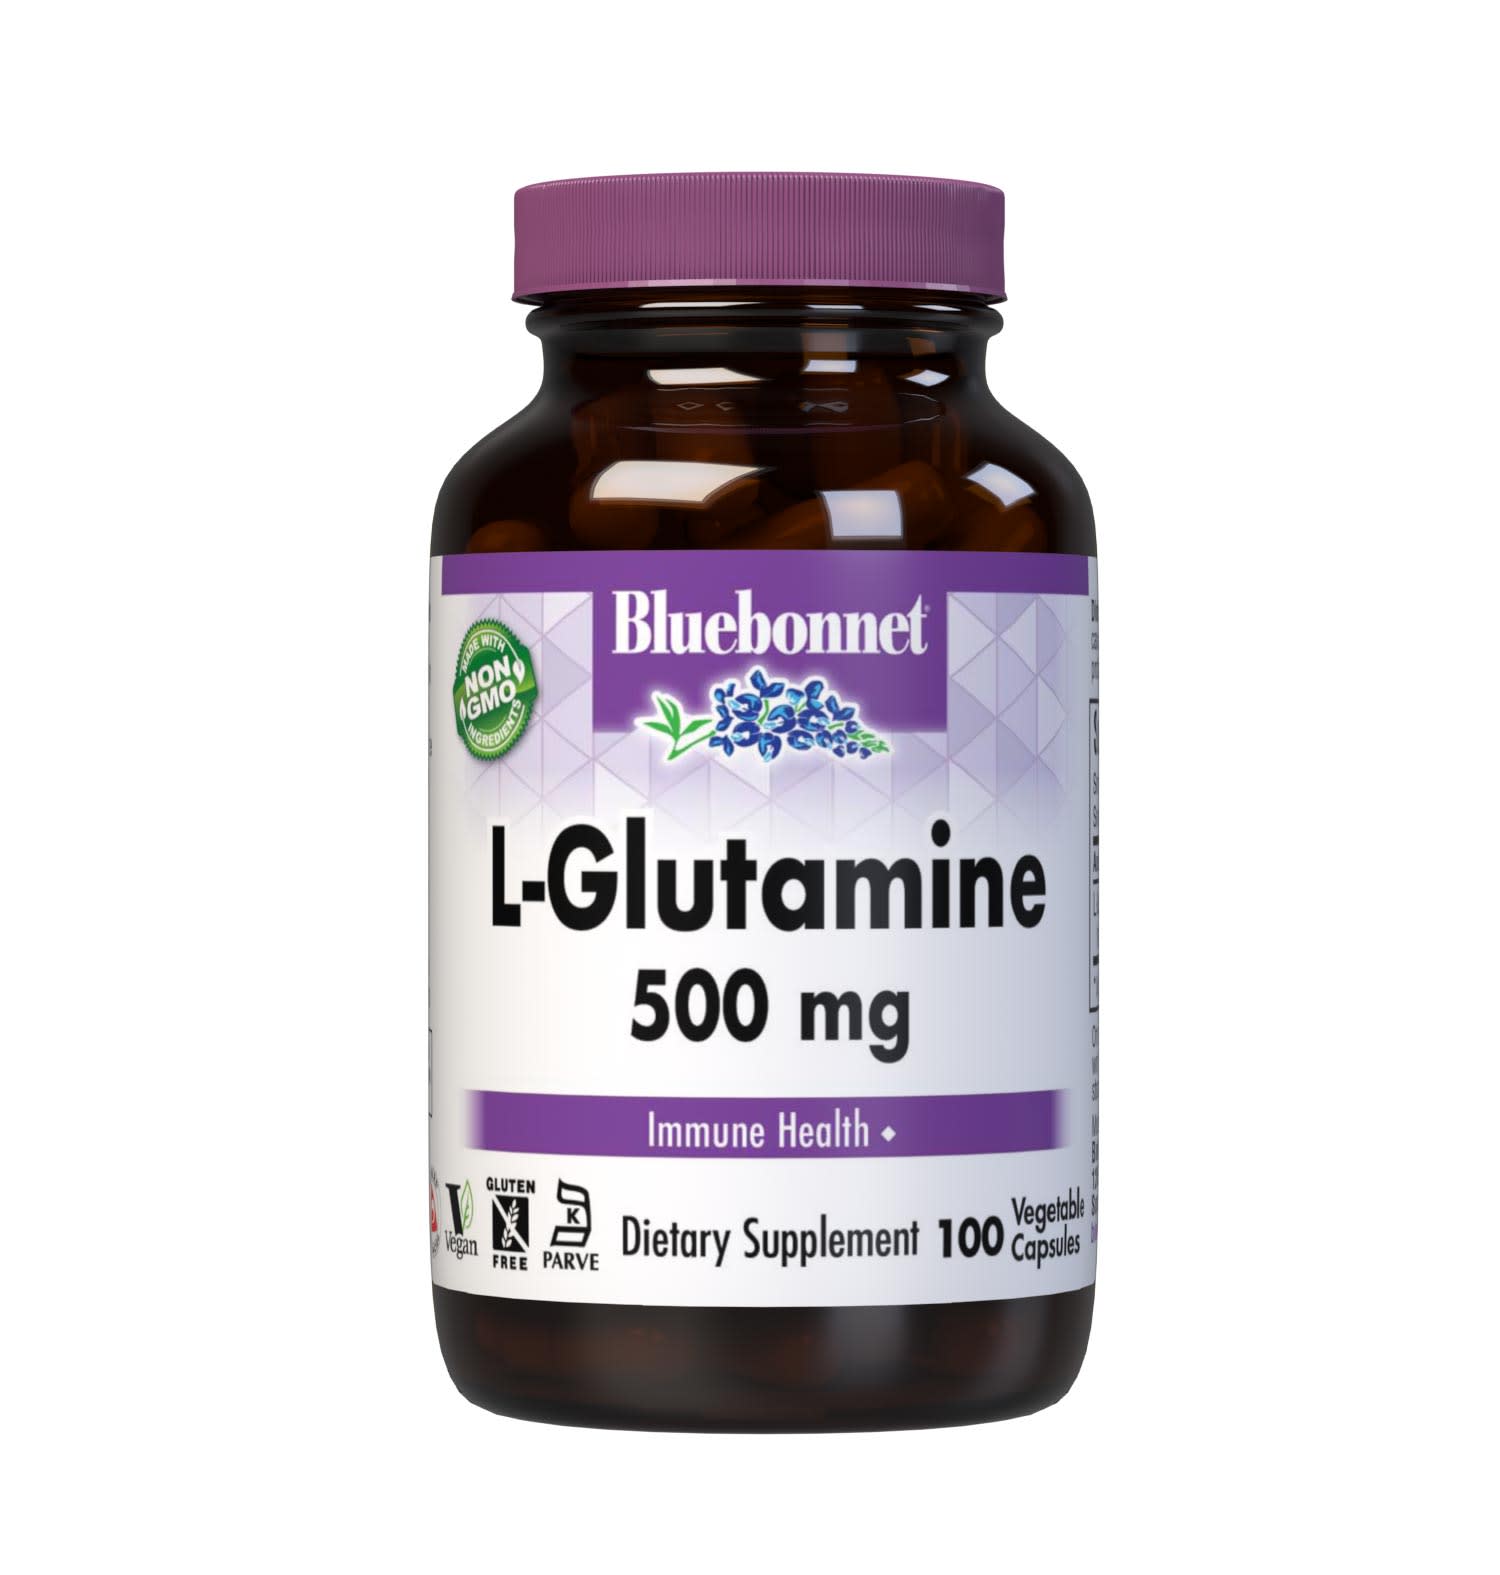 Bluebonnet’s L-Glutamine 500 mg 100 vegetable capsules are formulated with the free-form amino acid L-glutamine in its crystalline form from Ajinomoto to help support immune function. #size_100 count